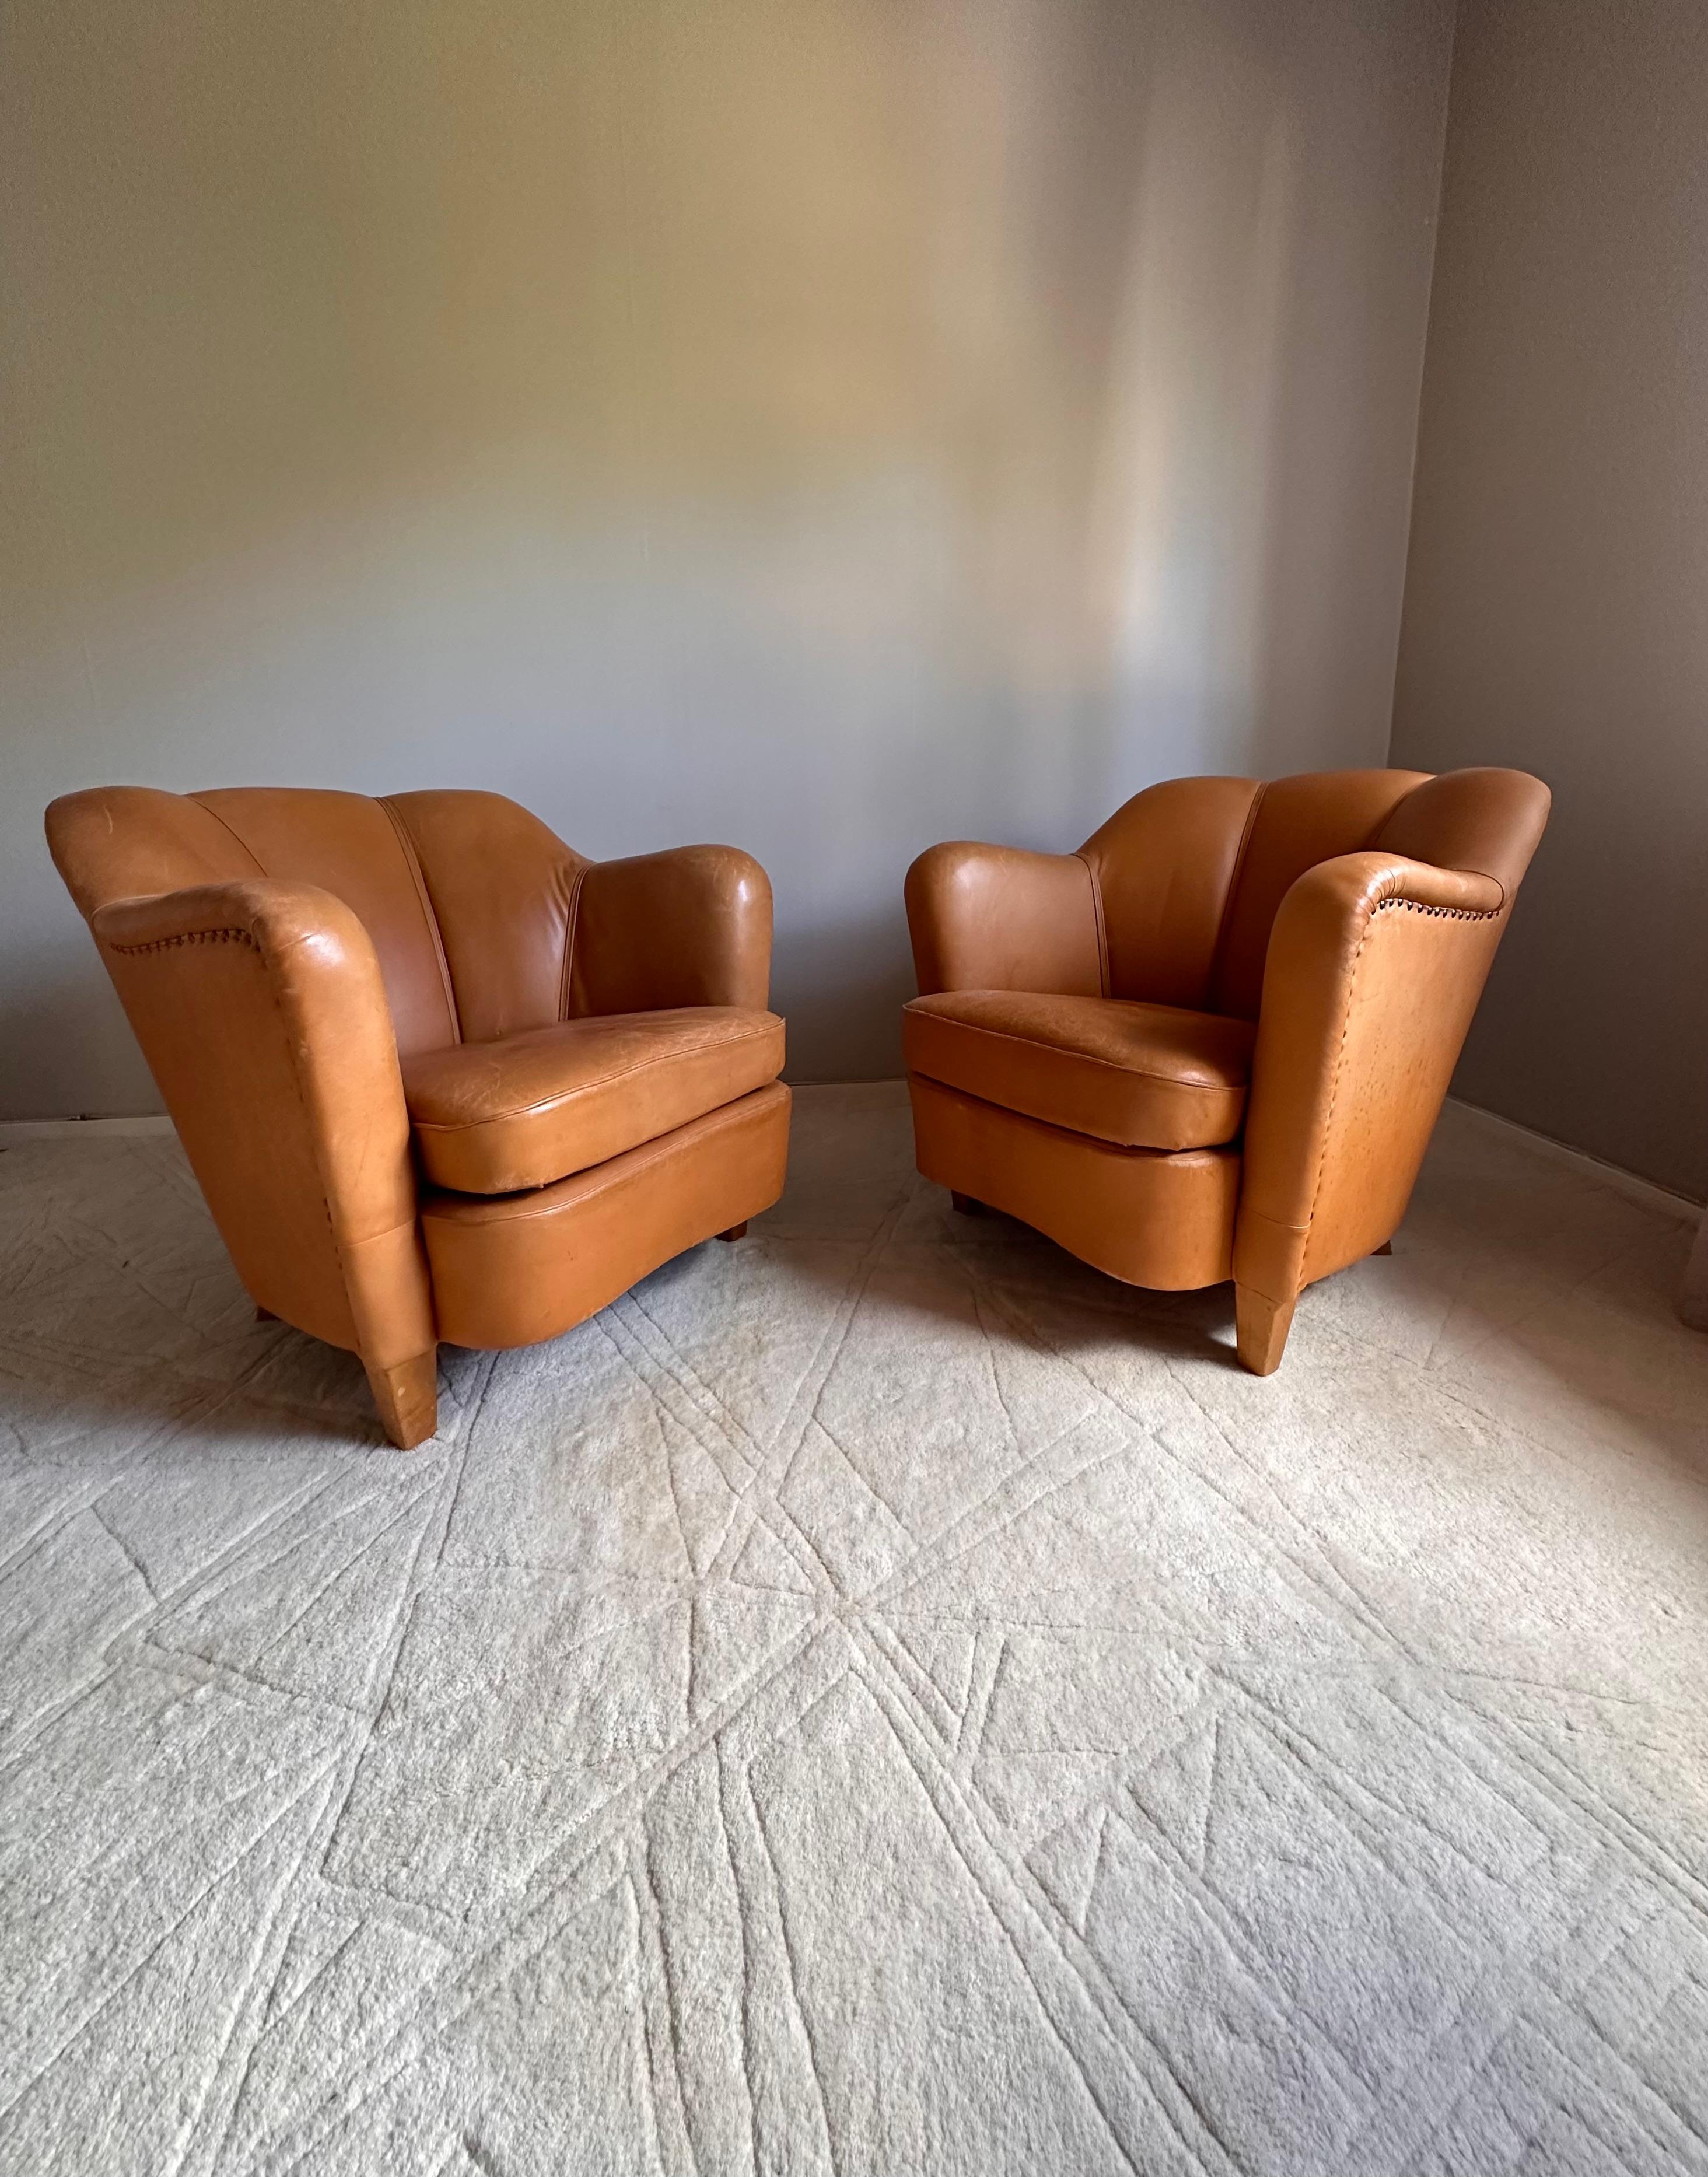 Pair of easy chairs in brown/cognac leather with beautiful patina.
Probably designed by Otto Schulz for Boet in early mid-century.

Dimensions(cm):
Height: 71
Width: 76
Depth: 68
Seat height: 40

Condition:
Excellent condition with